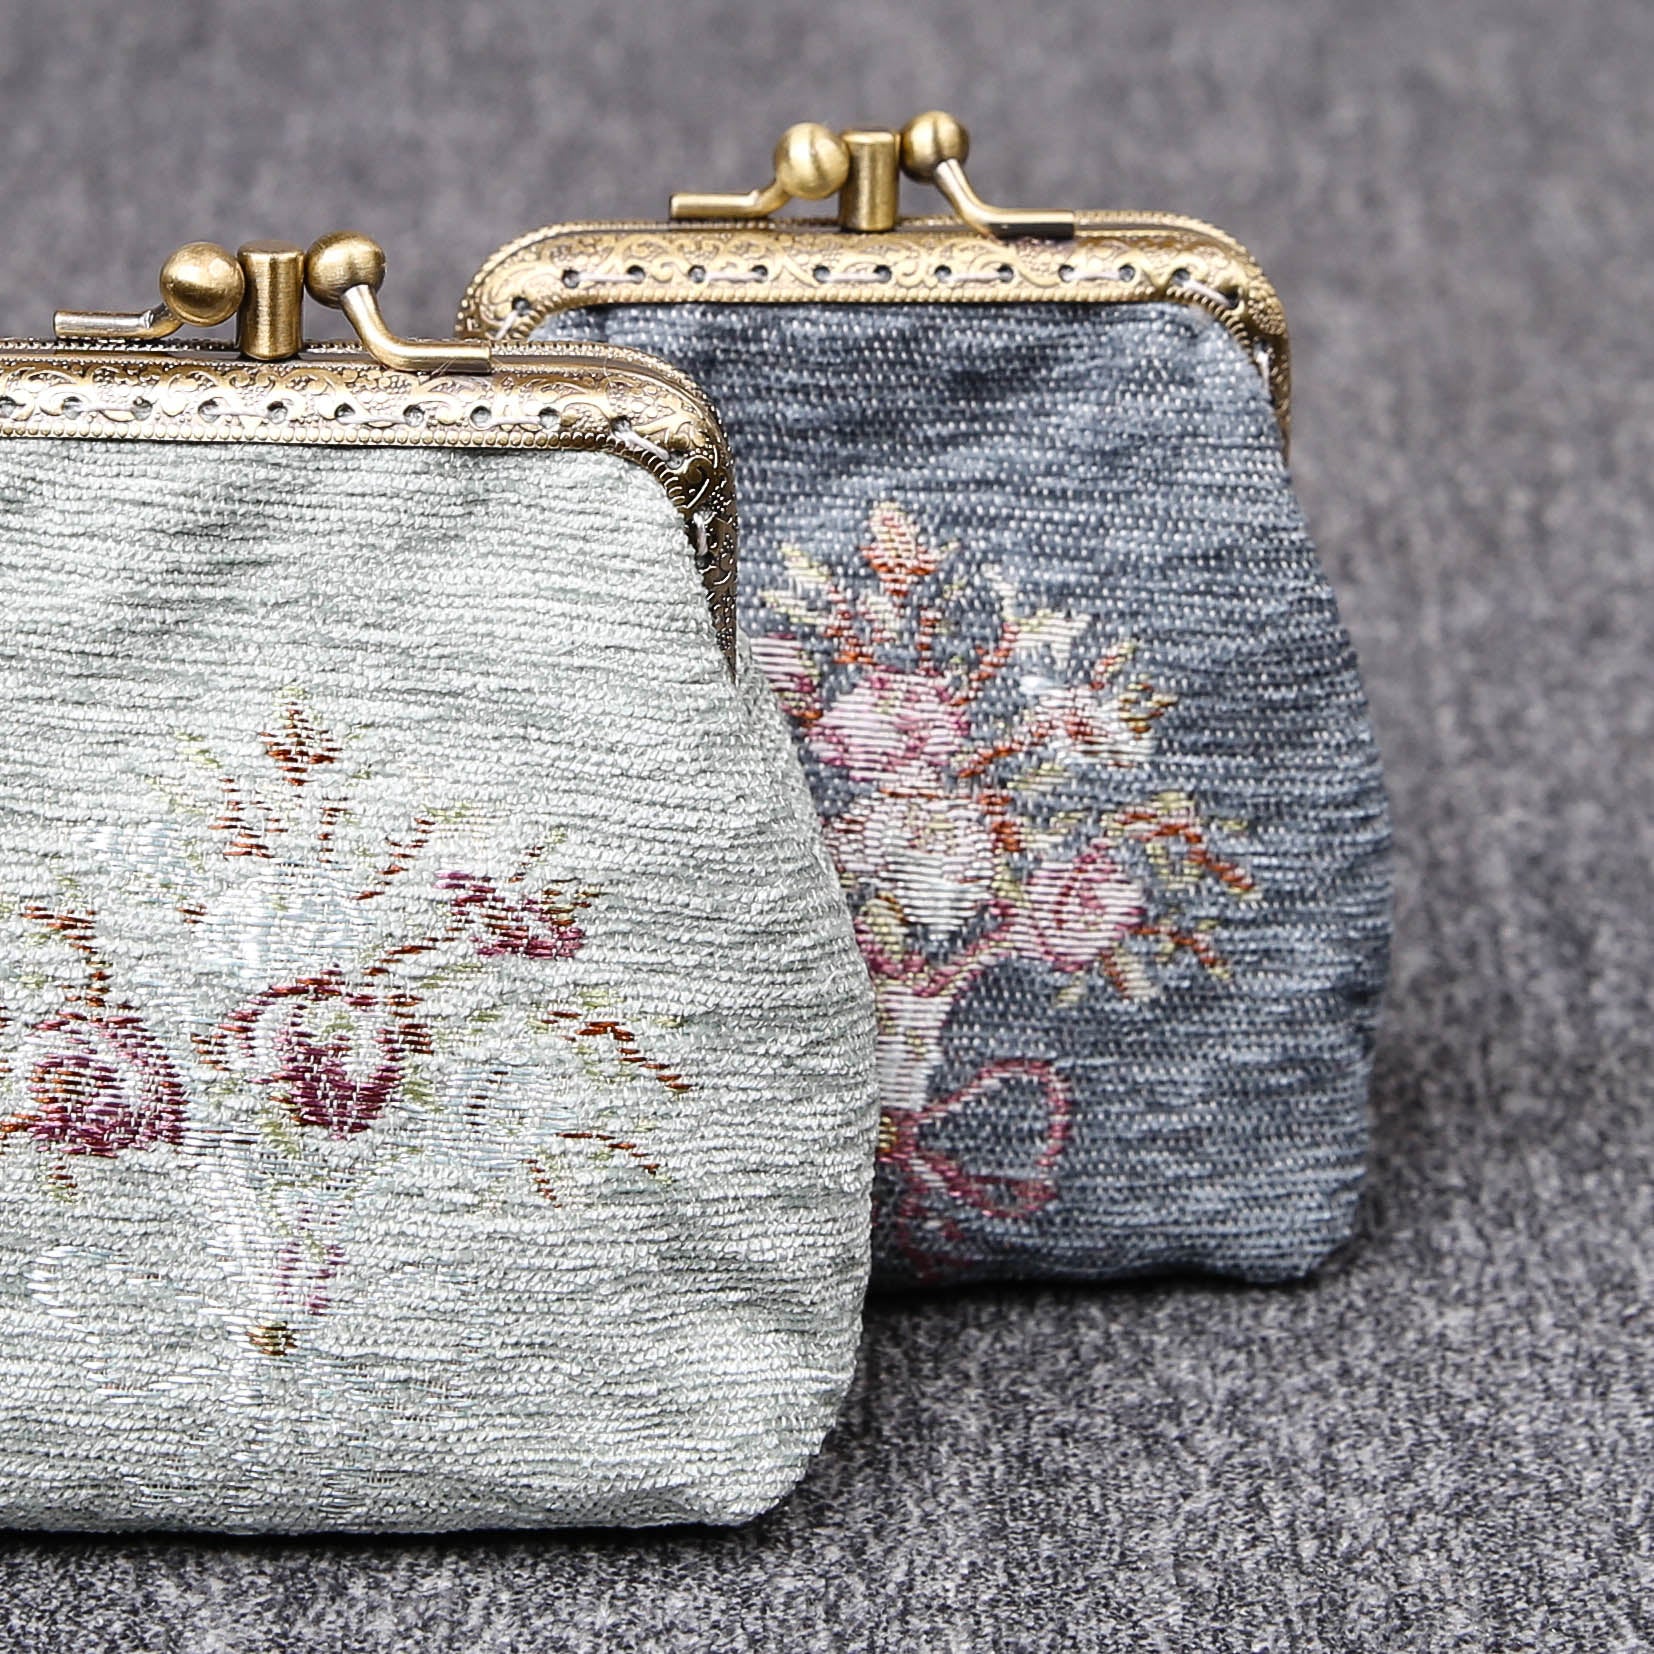 Double Kisslock Coin Purse from Barbosa Collection